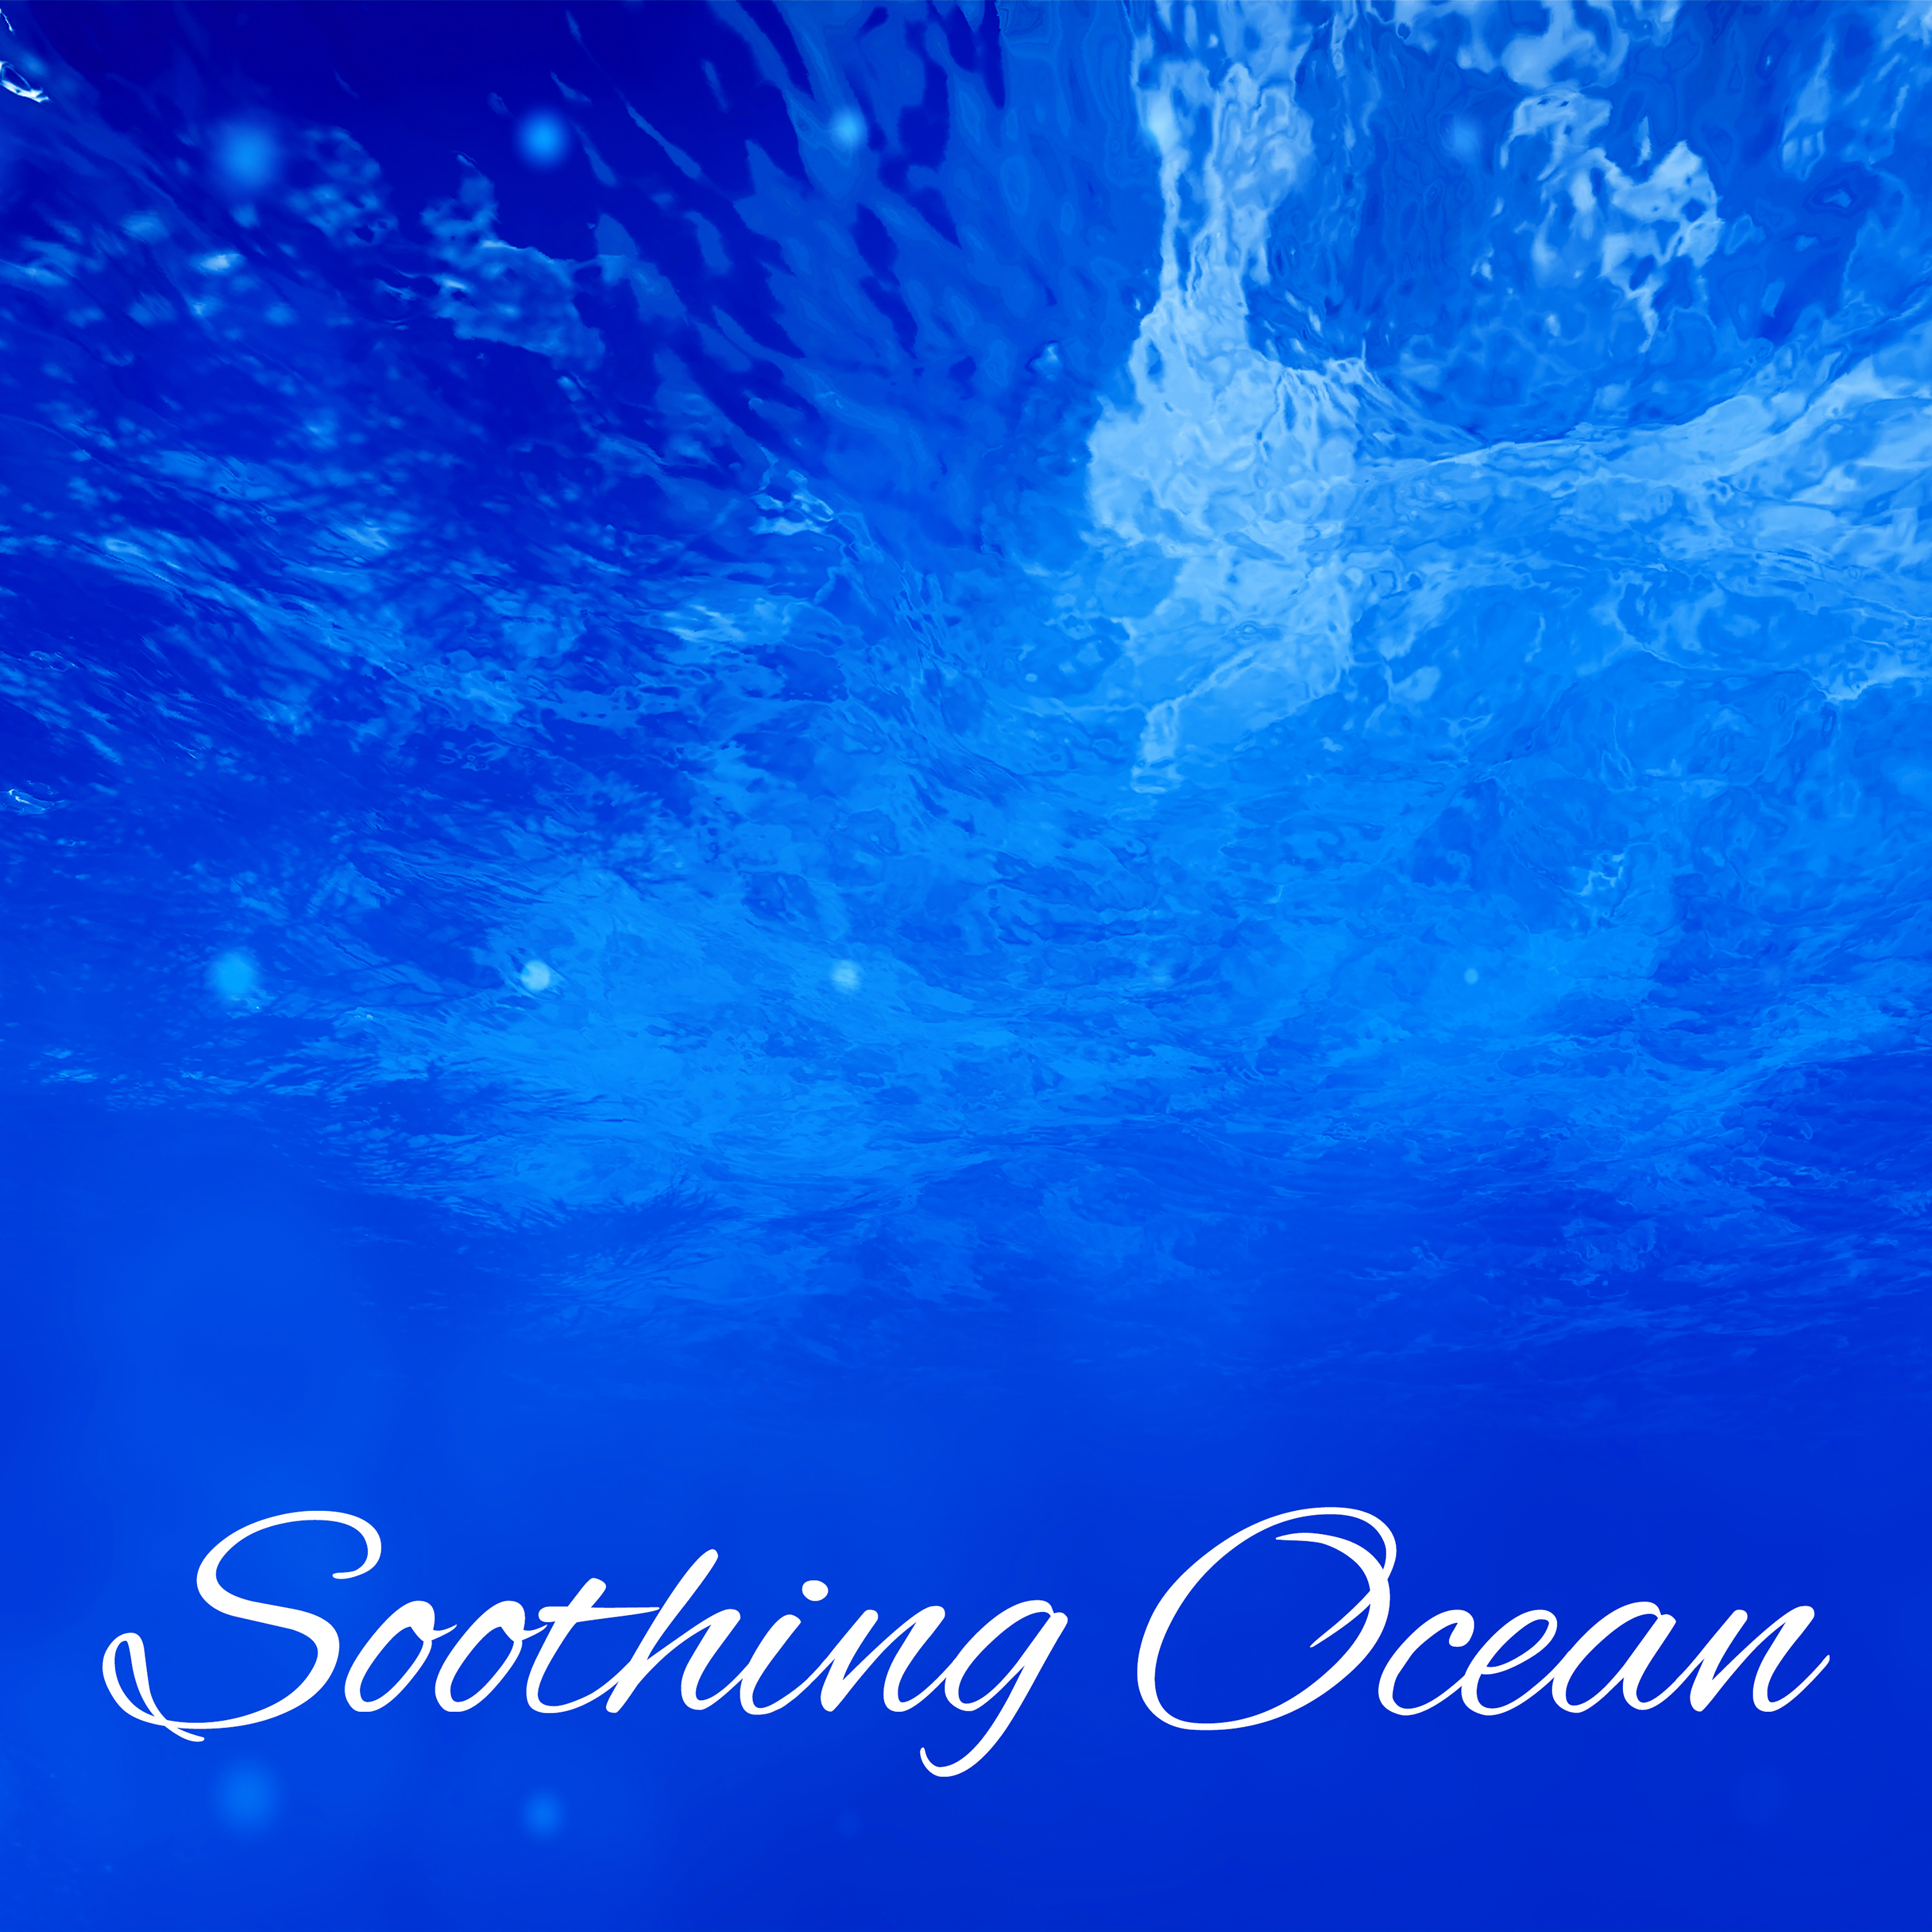 Soothing Ocean – Nature Sounds for Relaxation, Deep Relief, Calming Music, Relaxing Waves, Sea Sounds, Peaceful Mind